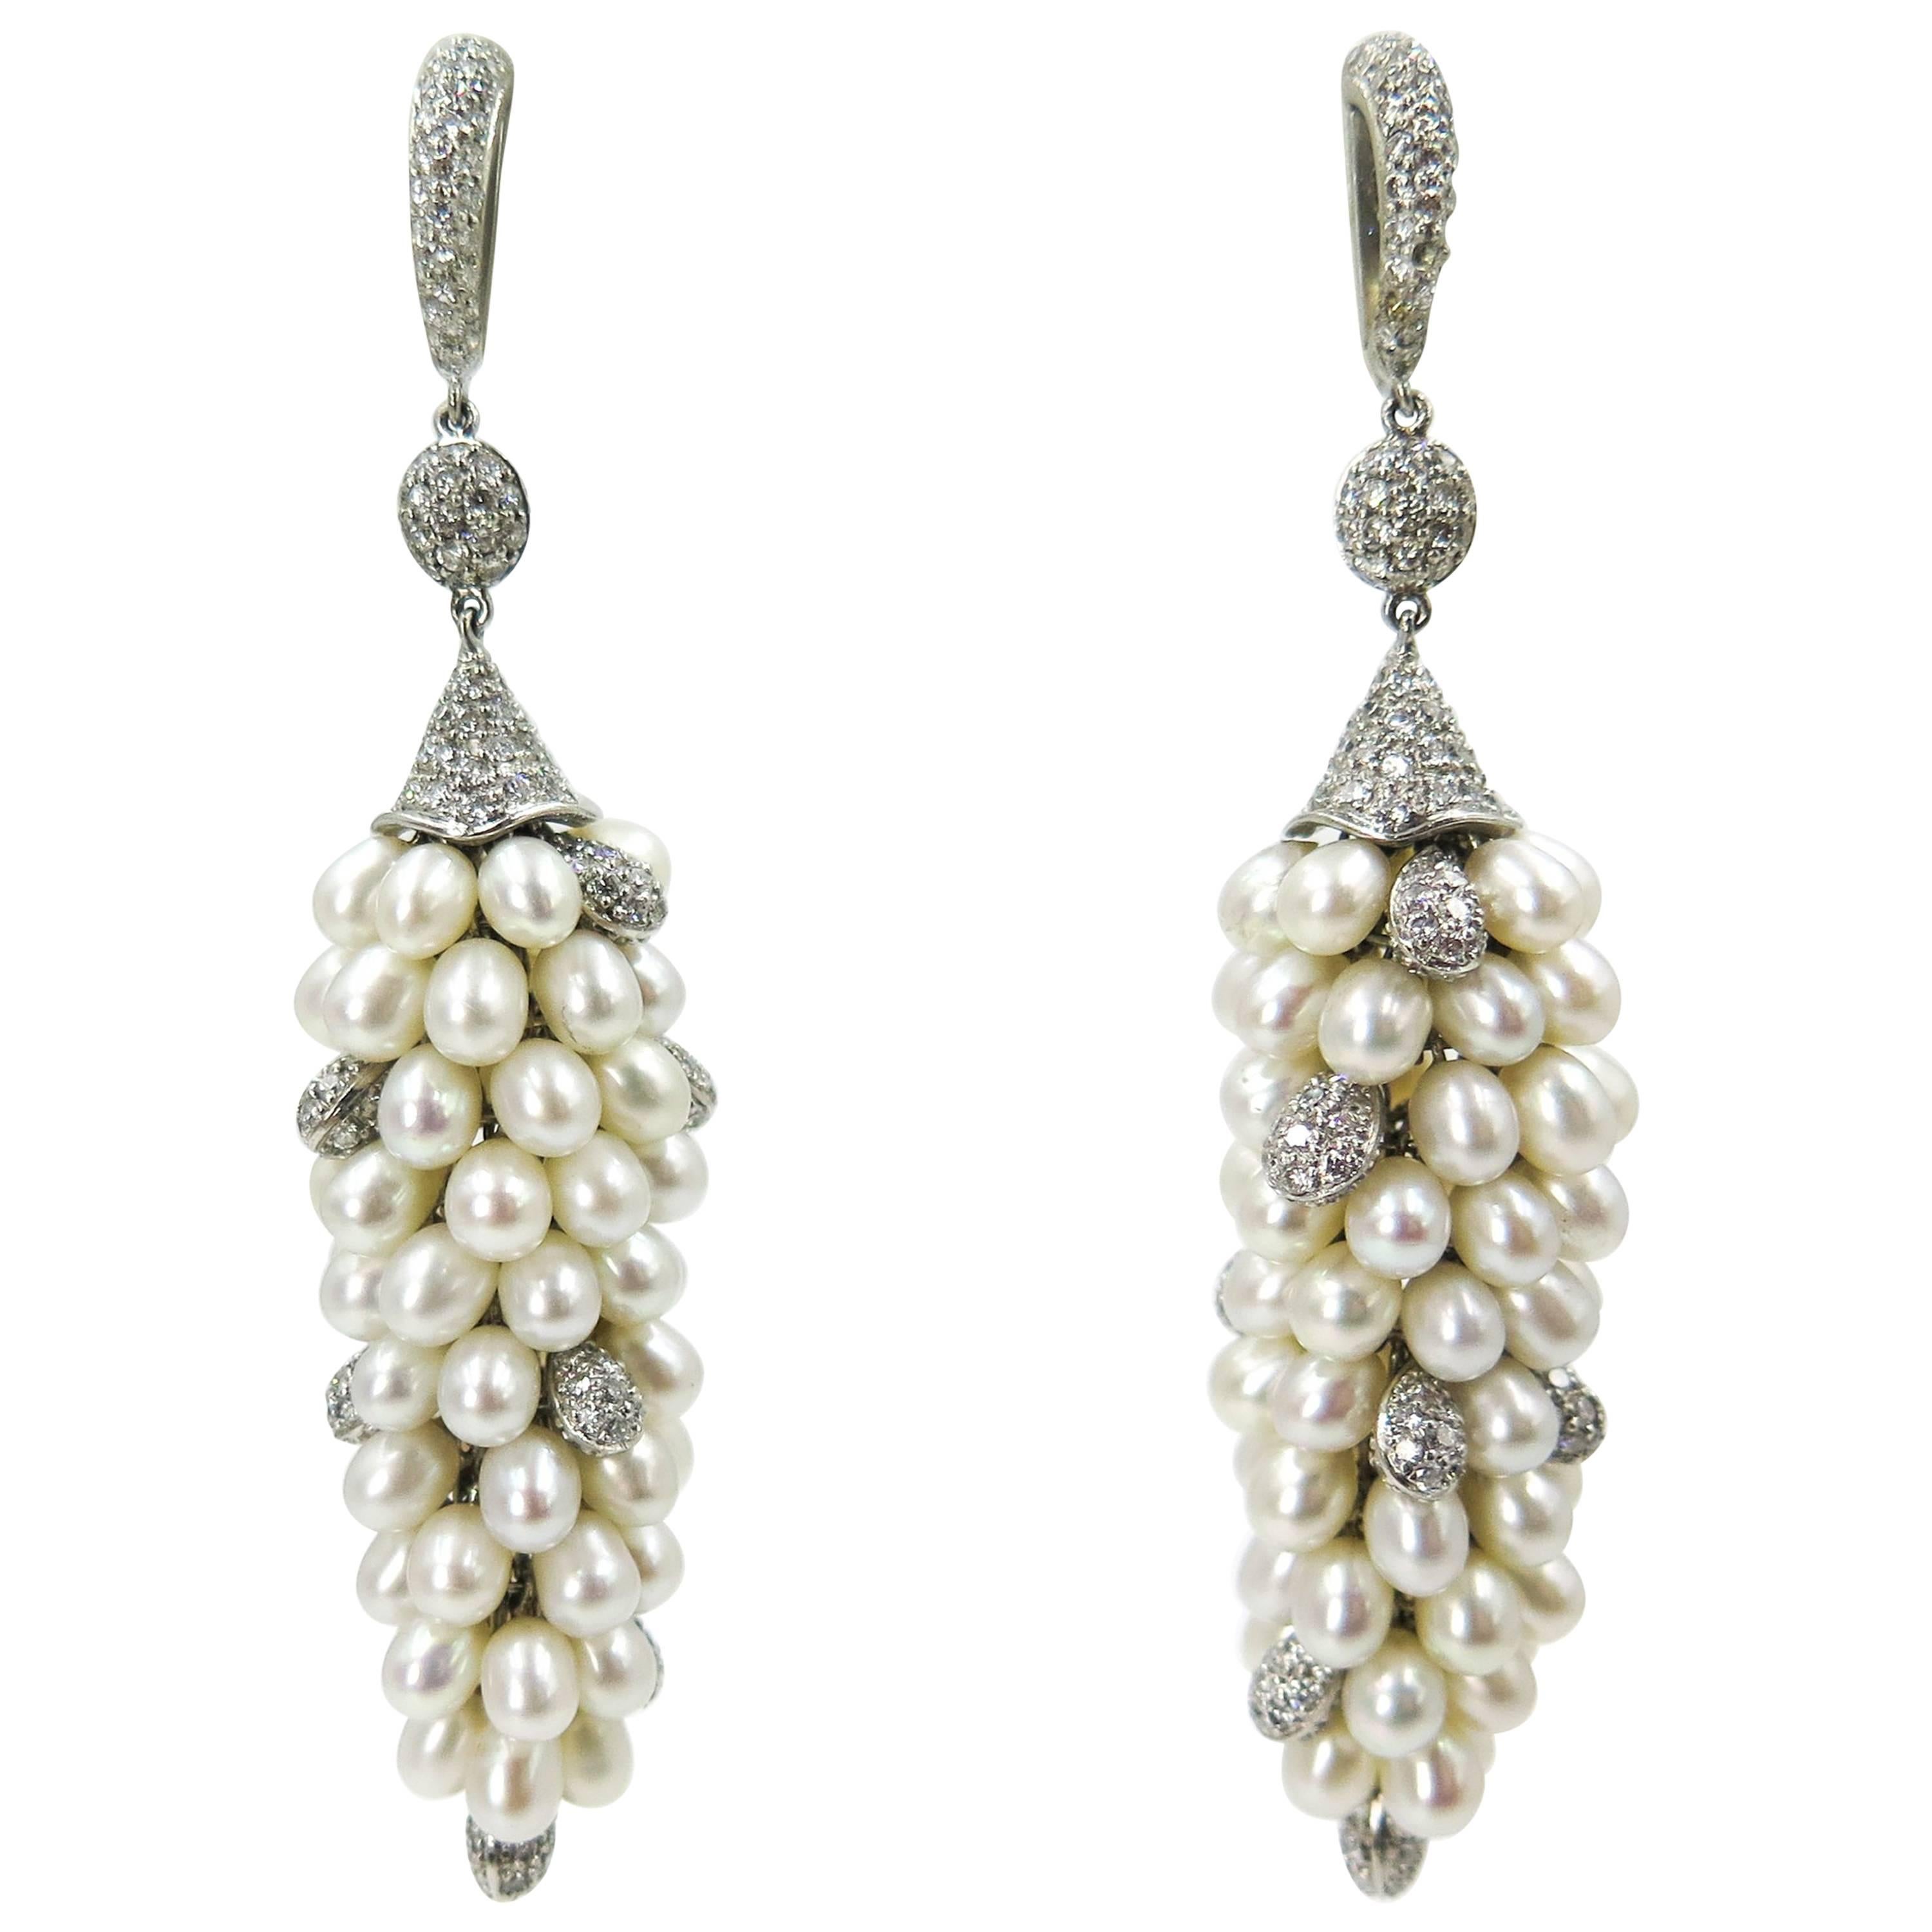 Fresh Water Pearls and Pave Diamond White Gold Chandelier Earrings